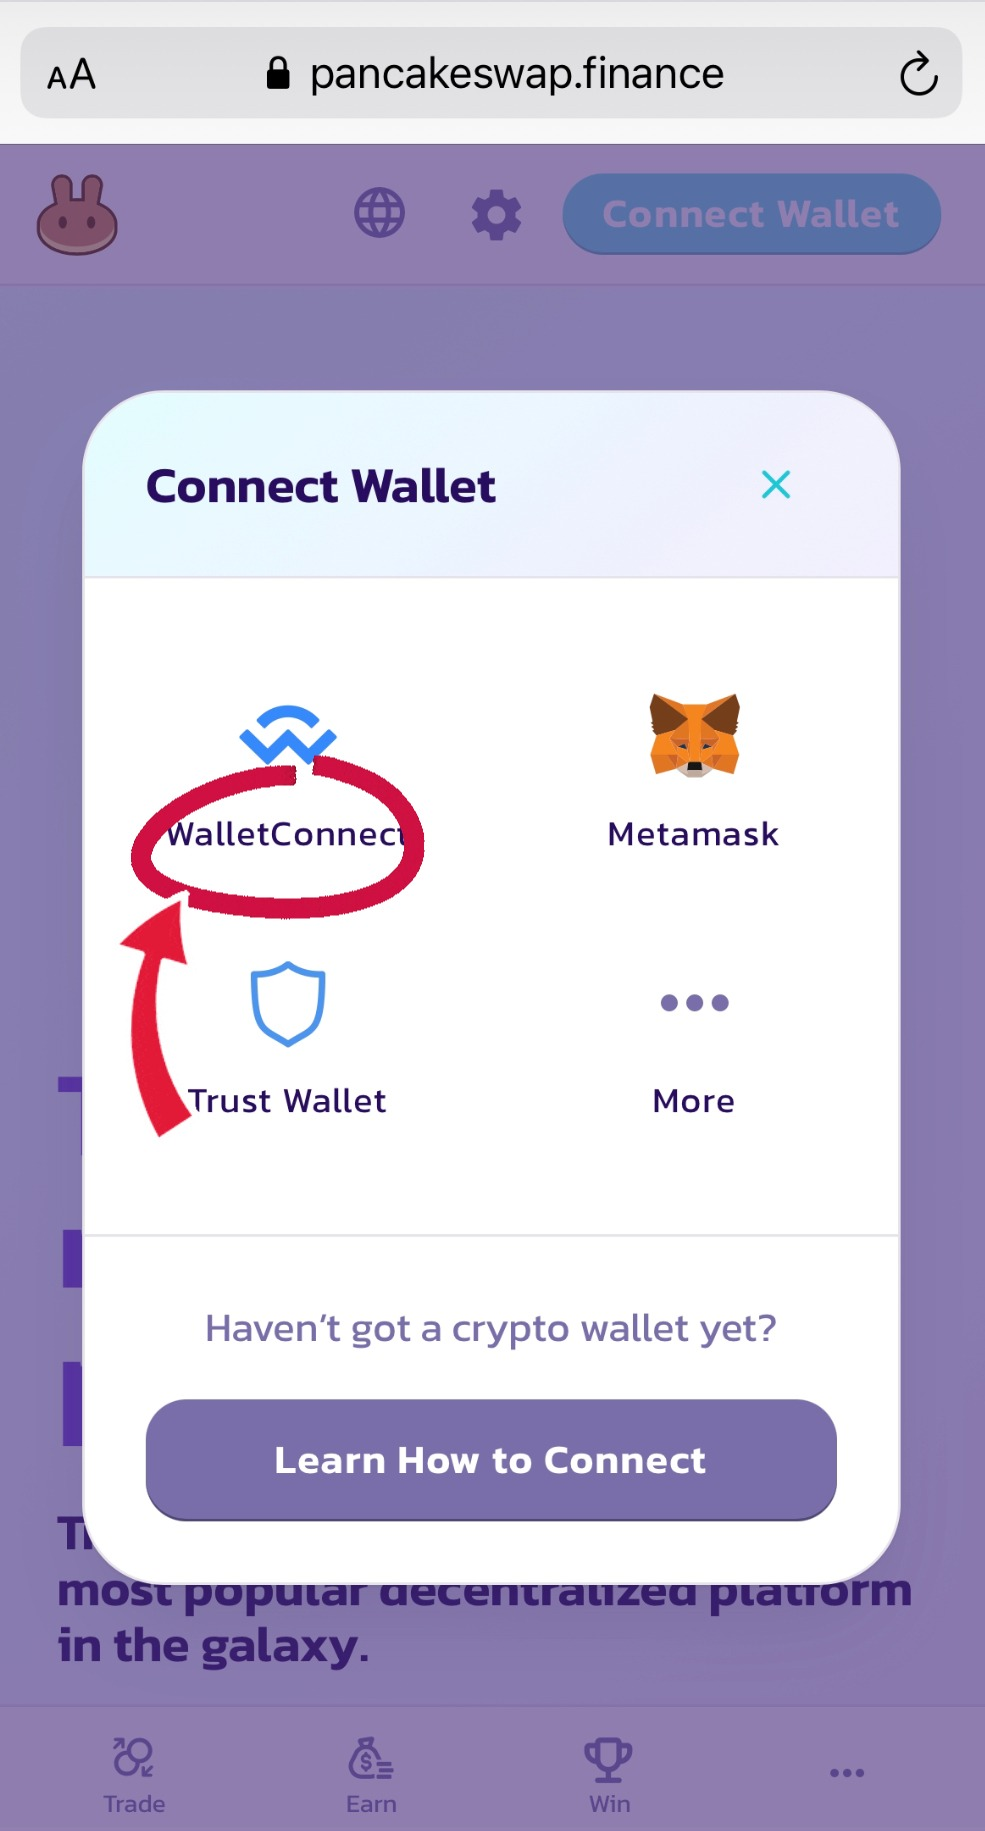 Click "Wallet connect"